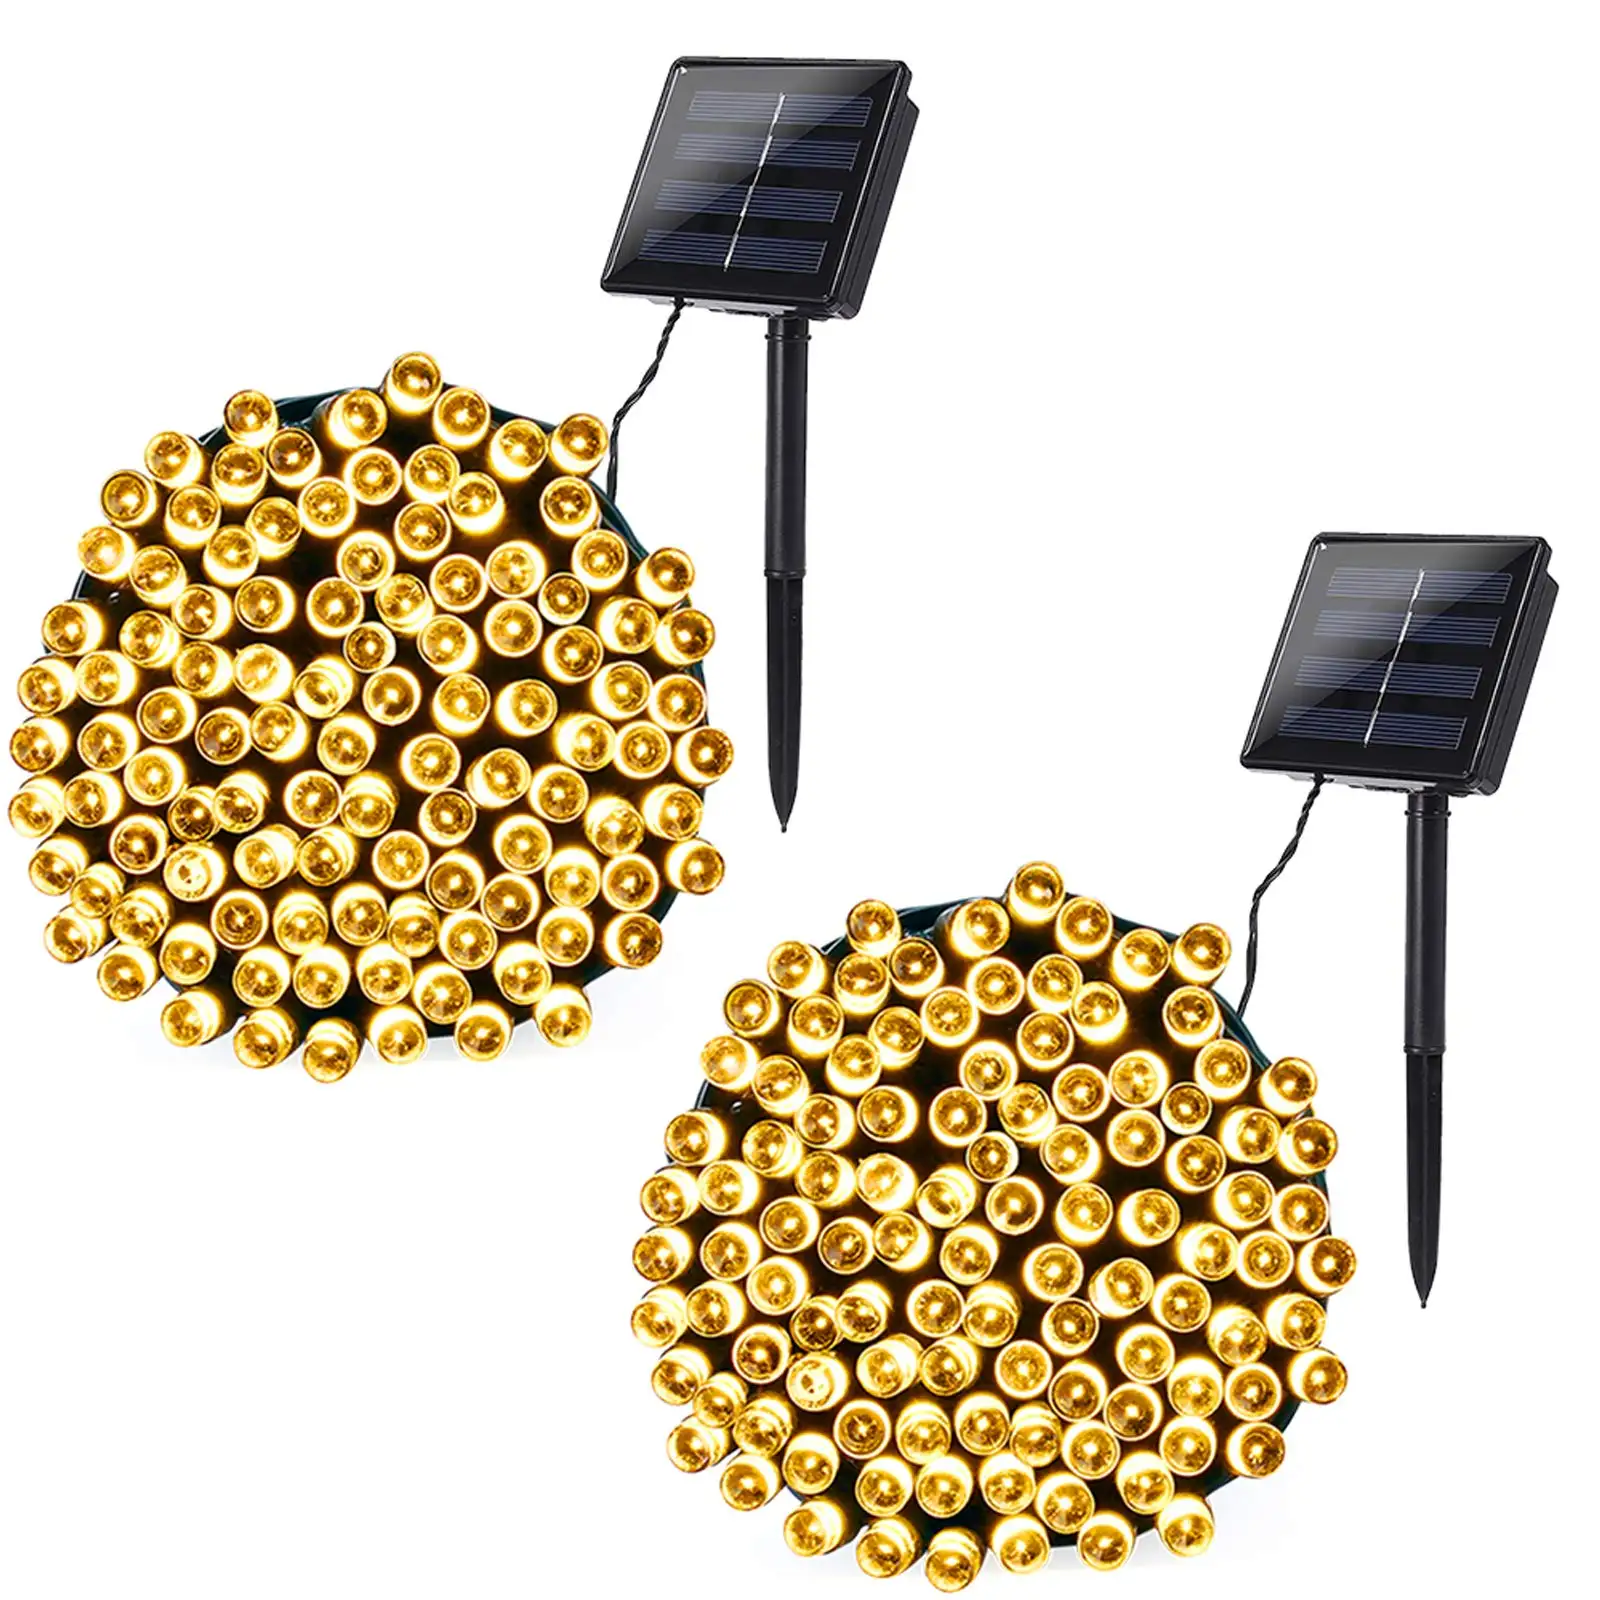 7M 50 LED 12M 100 LED Waterproof Solar String Lights for Garden Tree Patio Yard Wedding Party Christmas Outdoor Decoration